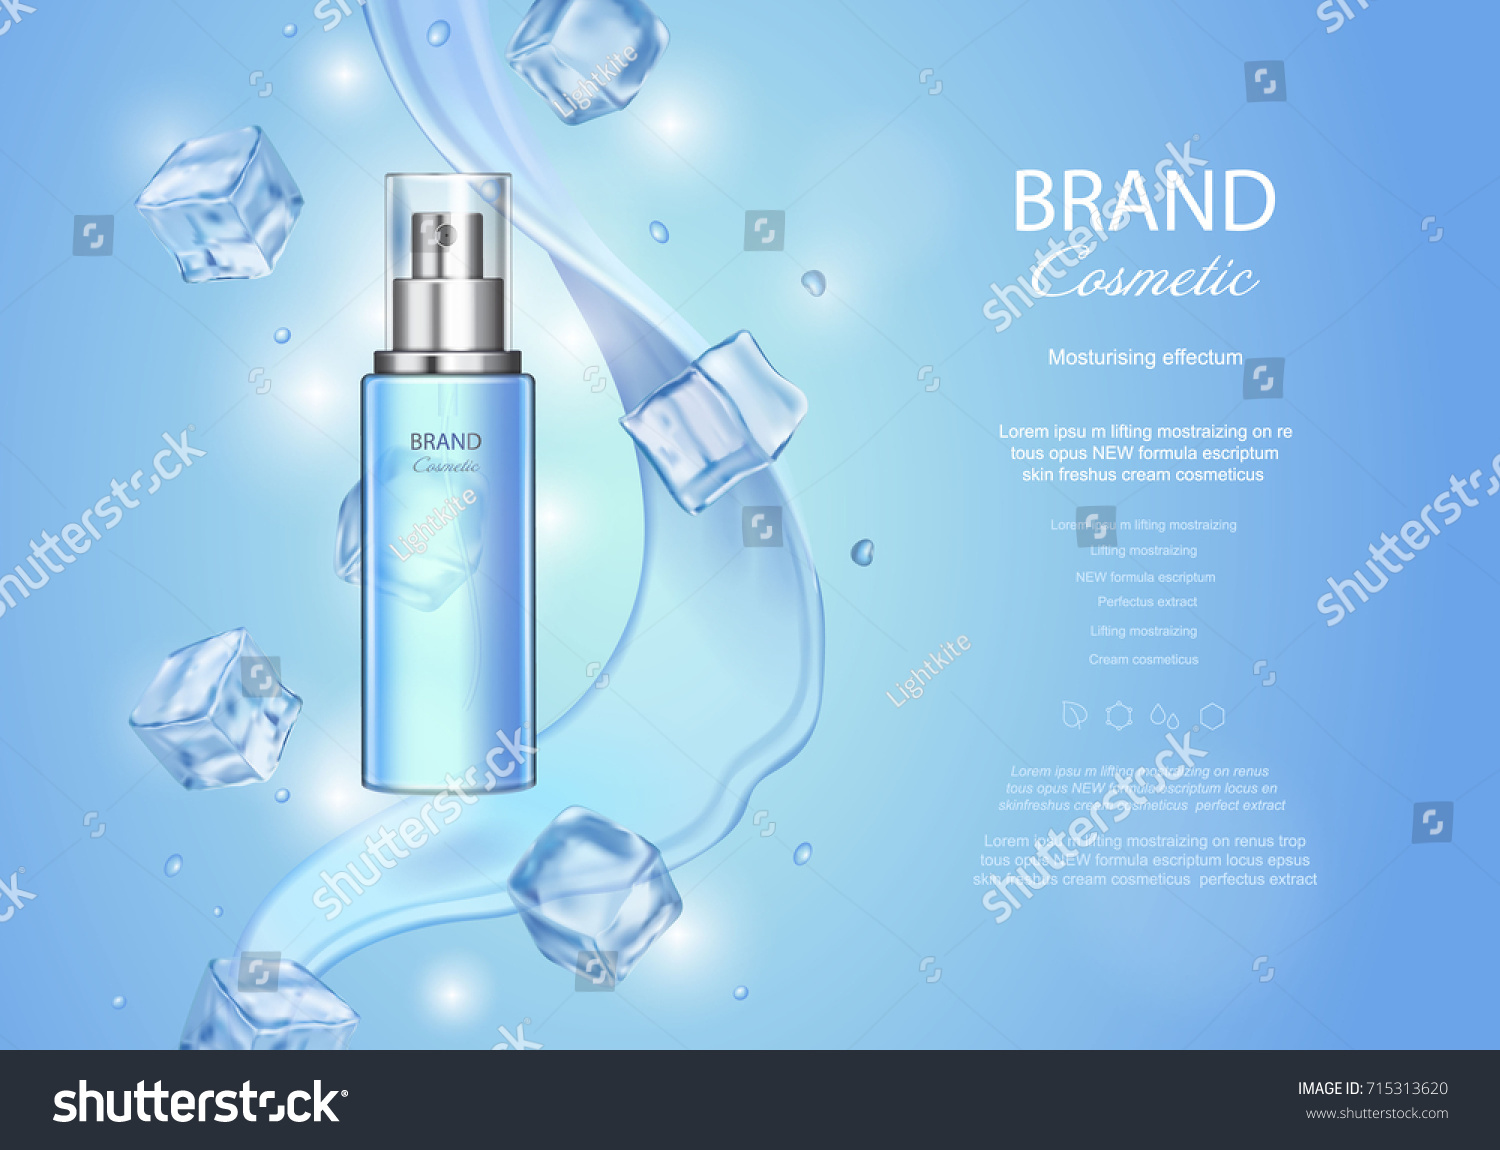 Ice toner ads with ice cubes. Blue spray bottle, water drops, realistic vector illustration, sparkling effect, waves background #715313620